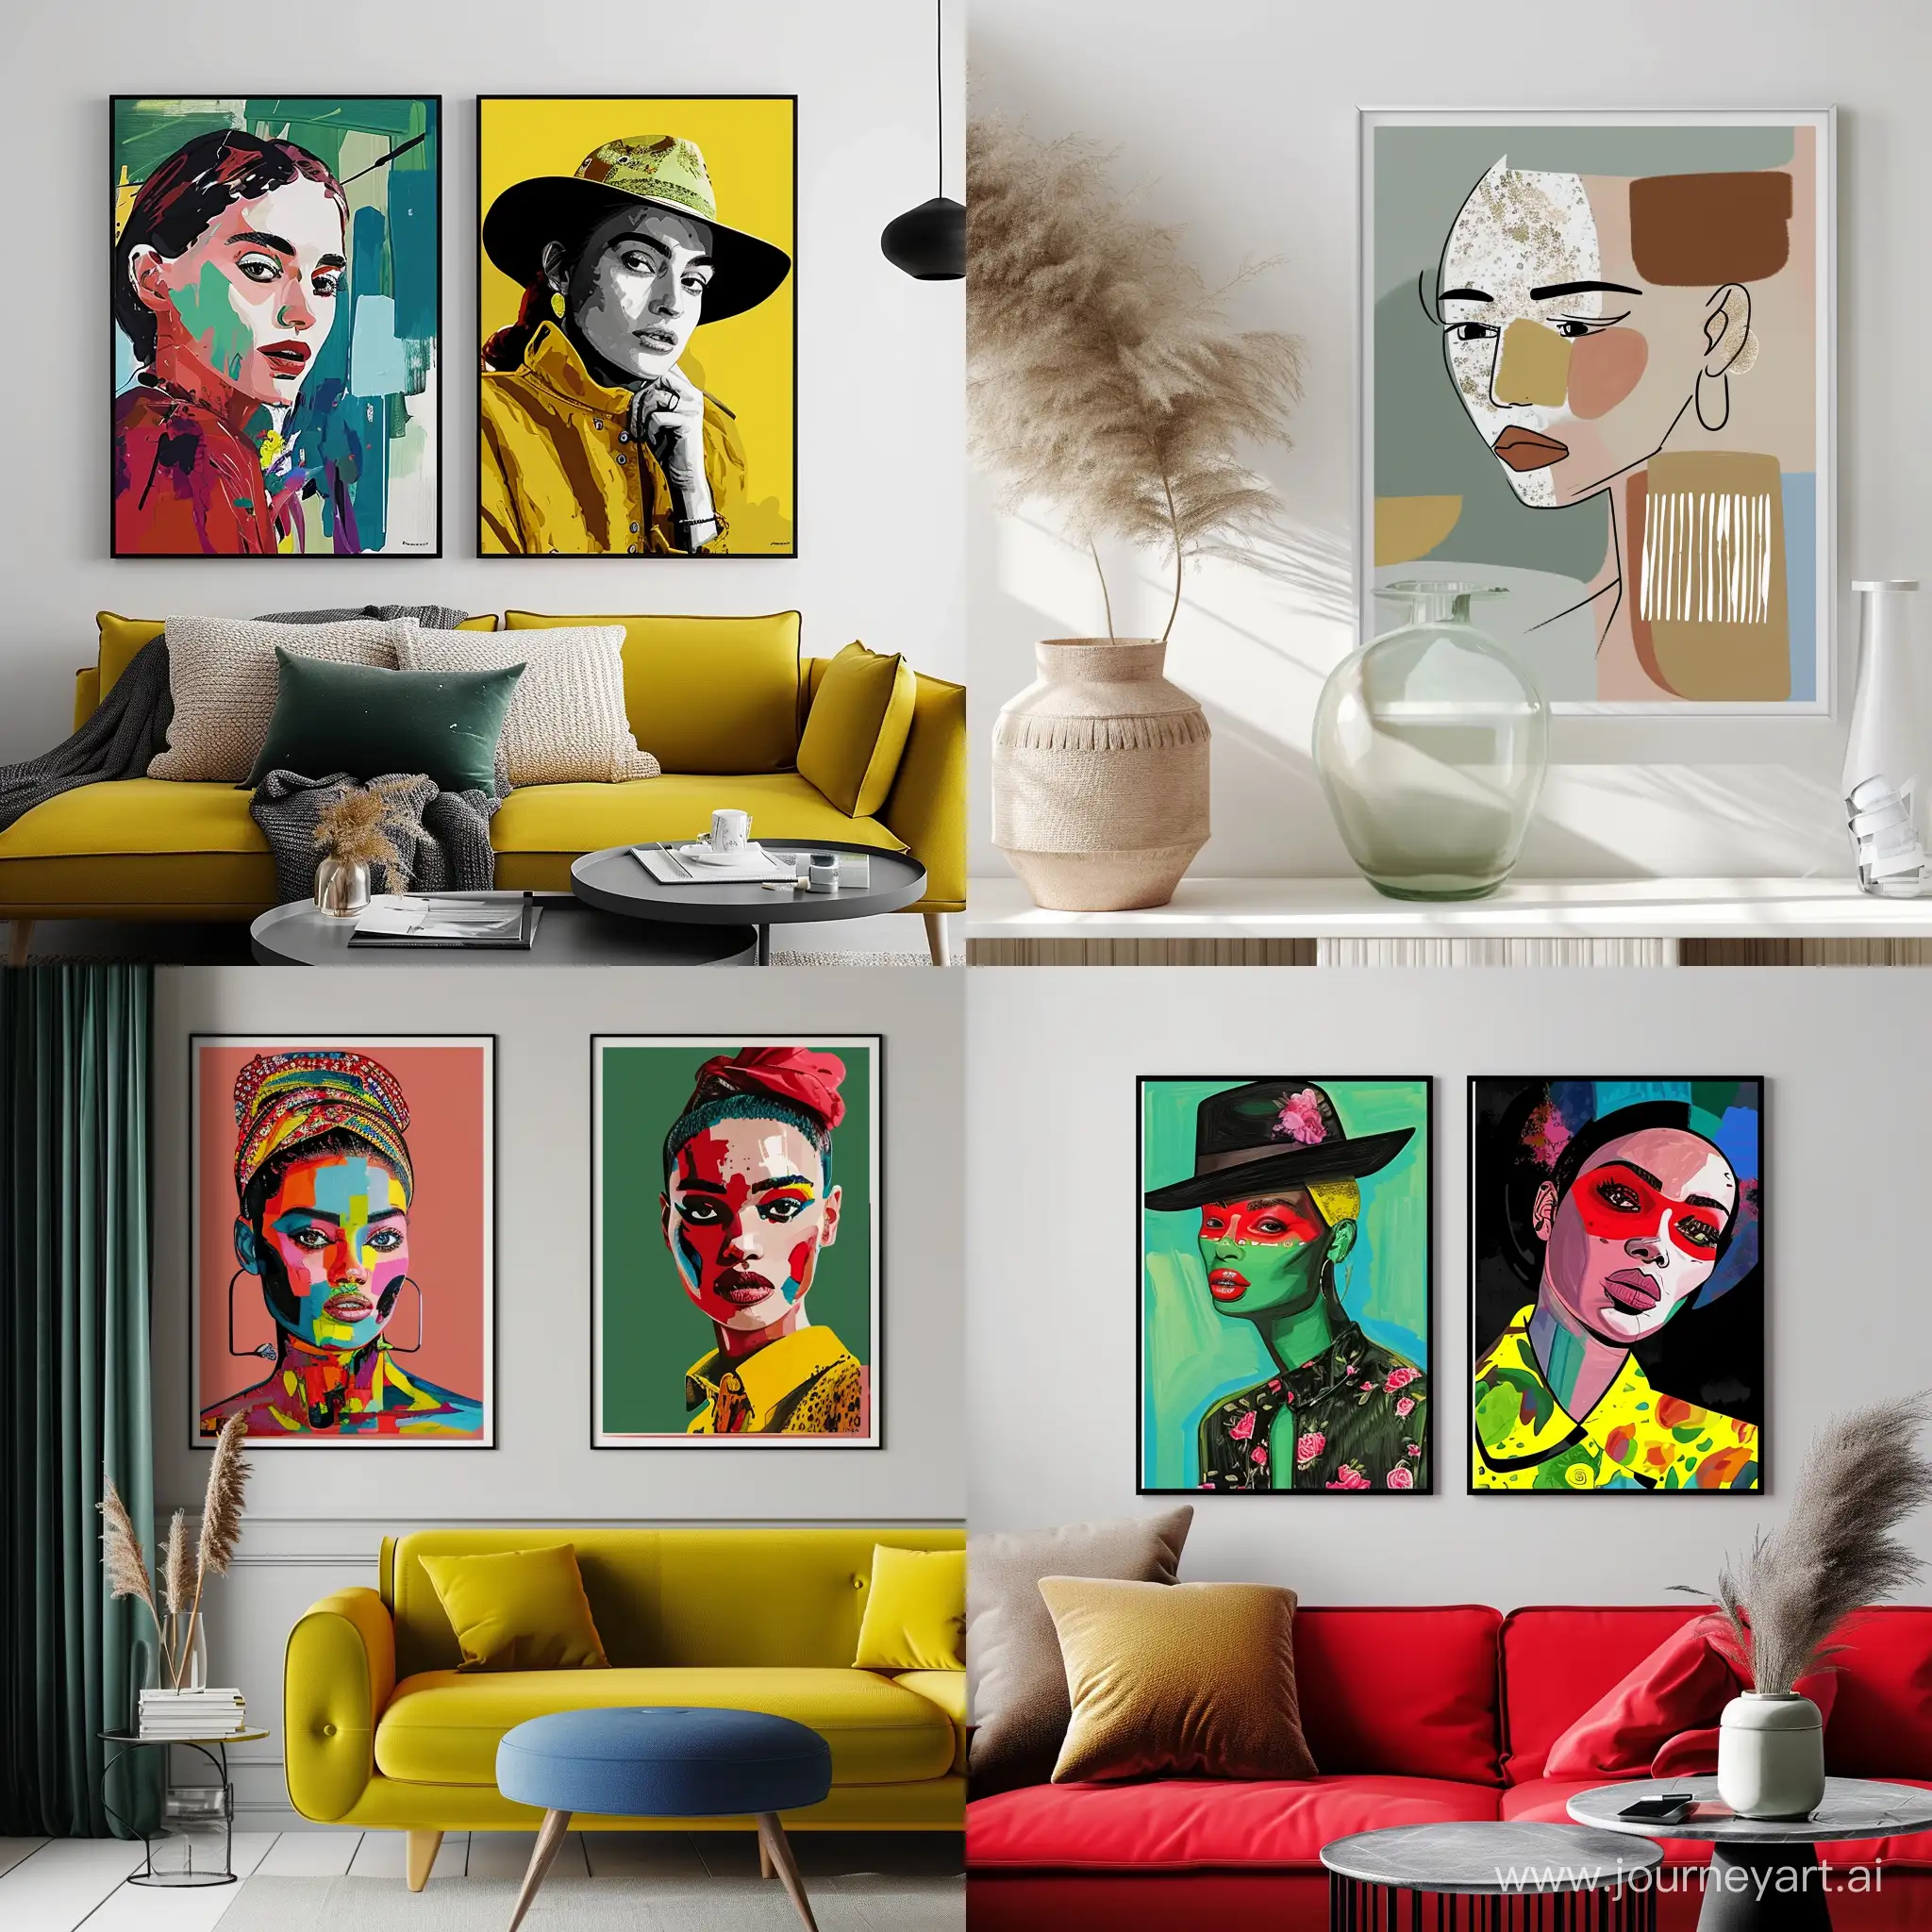 Different Woman Portrait illustration design 2 posters on the wall by Billy Childish 